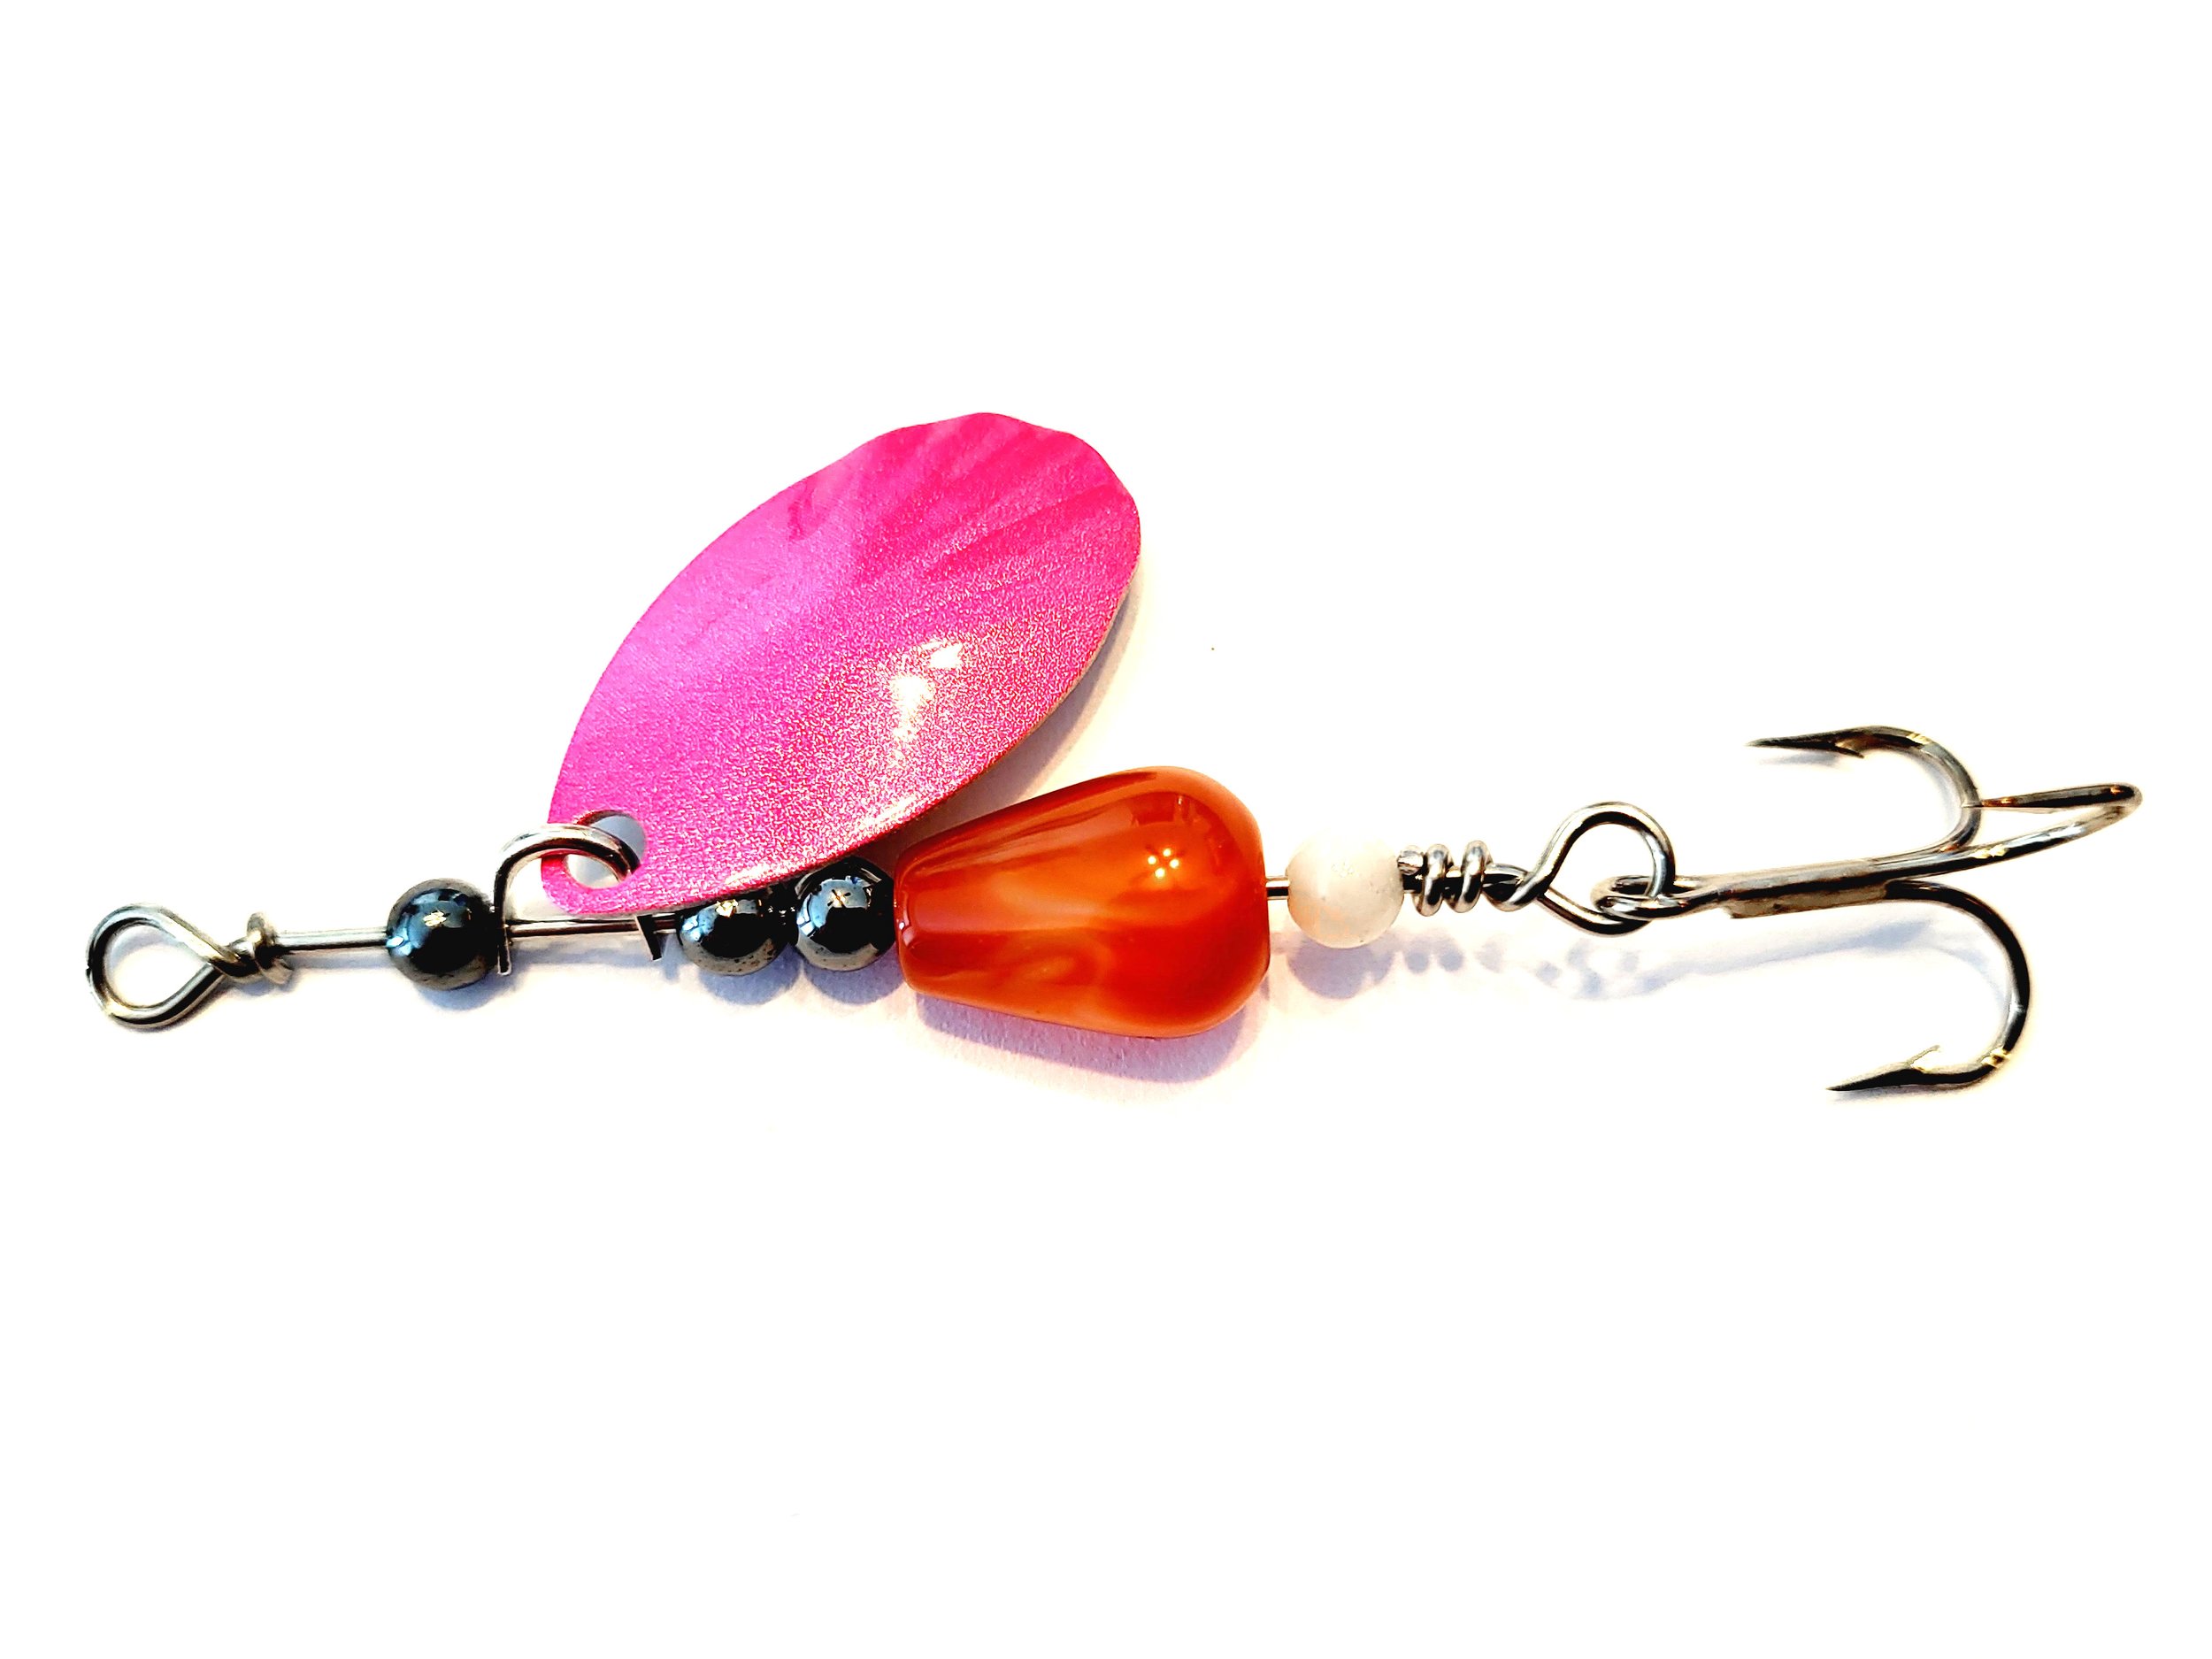 GeoFly | Inline Spinner for Trout Fishing — DEAD END LURES